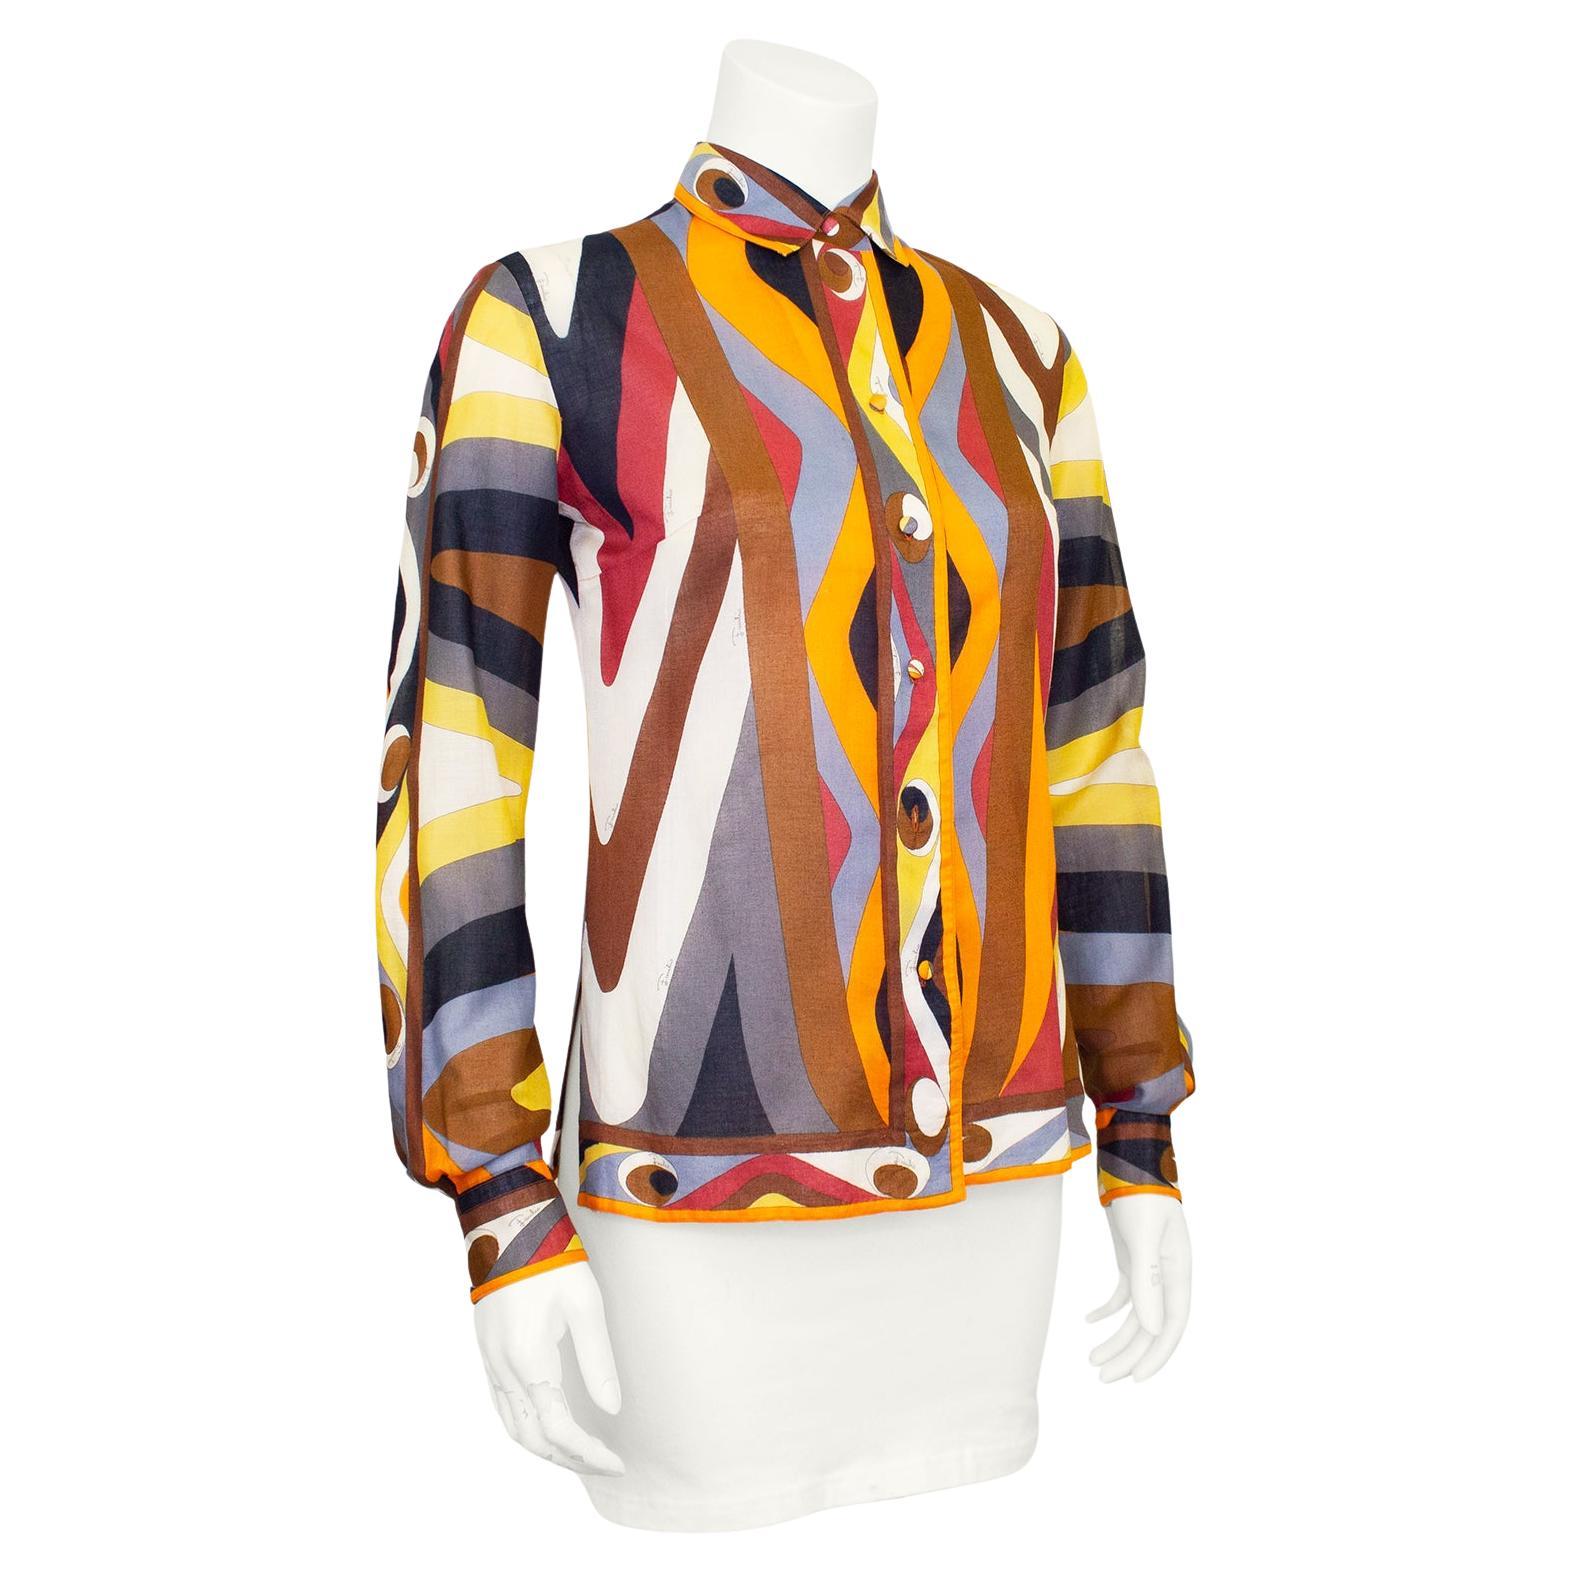 Beautiful Emilio Pucci shirt from the 1970s. Fine cotton in the iconic Pucci abstract geometric print in deep rich tones of orange, grey, yellow and black. Great option for the summer months as the light cotton is great for the heat. Slightly sheer.